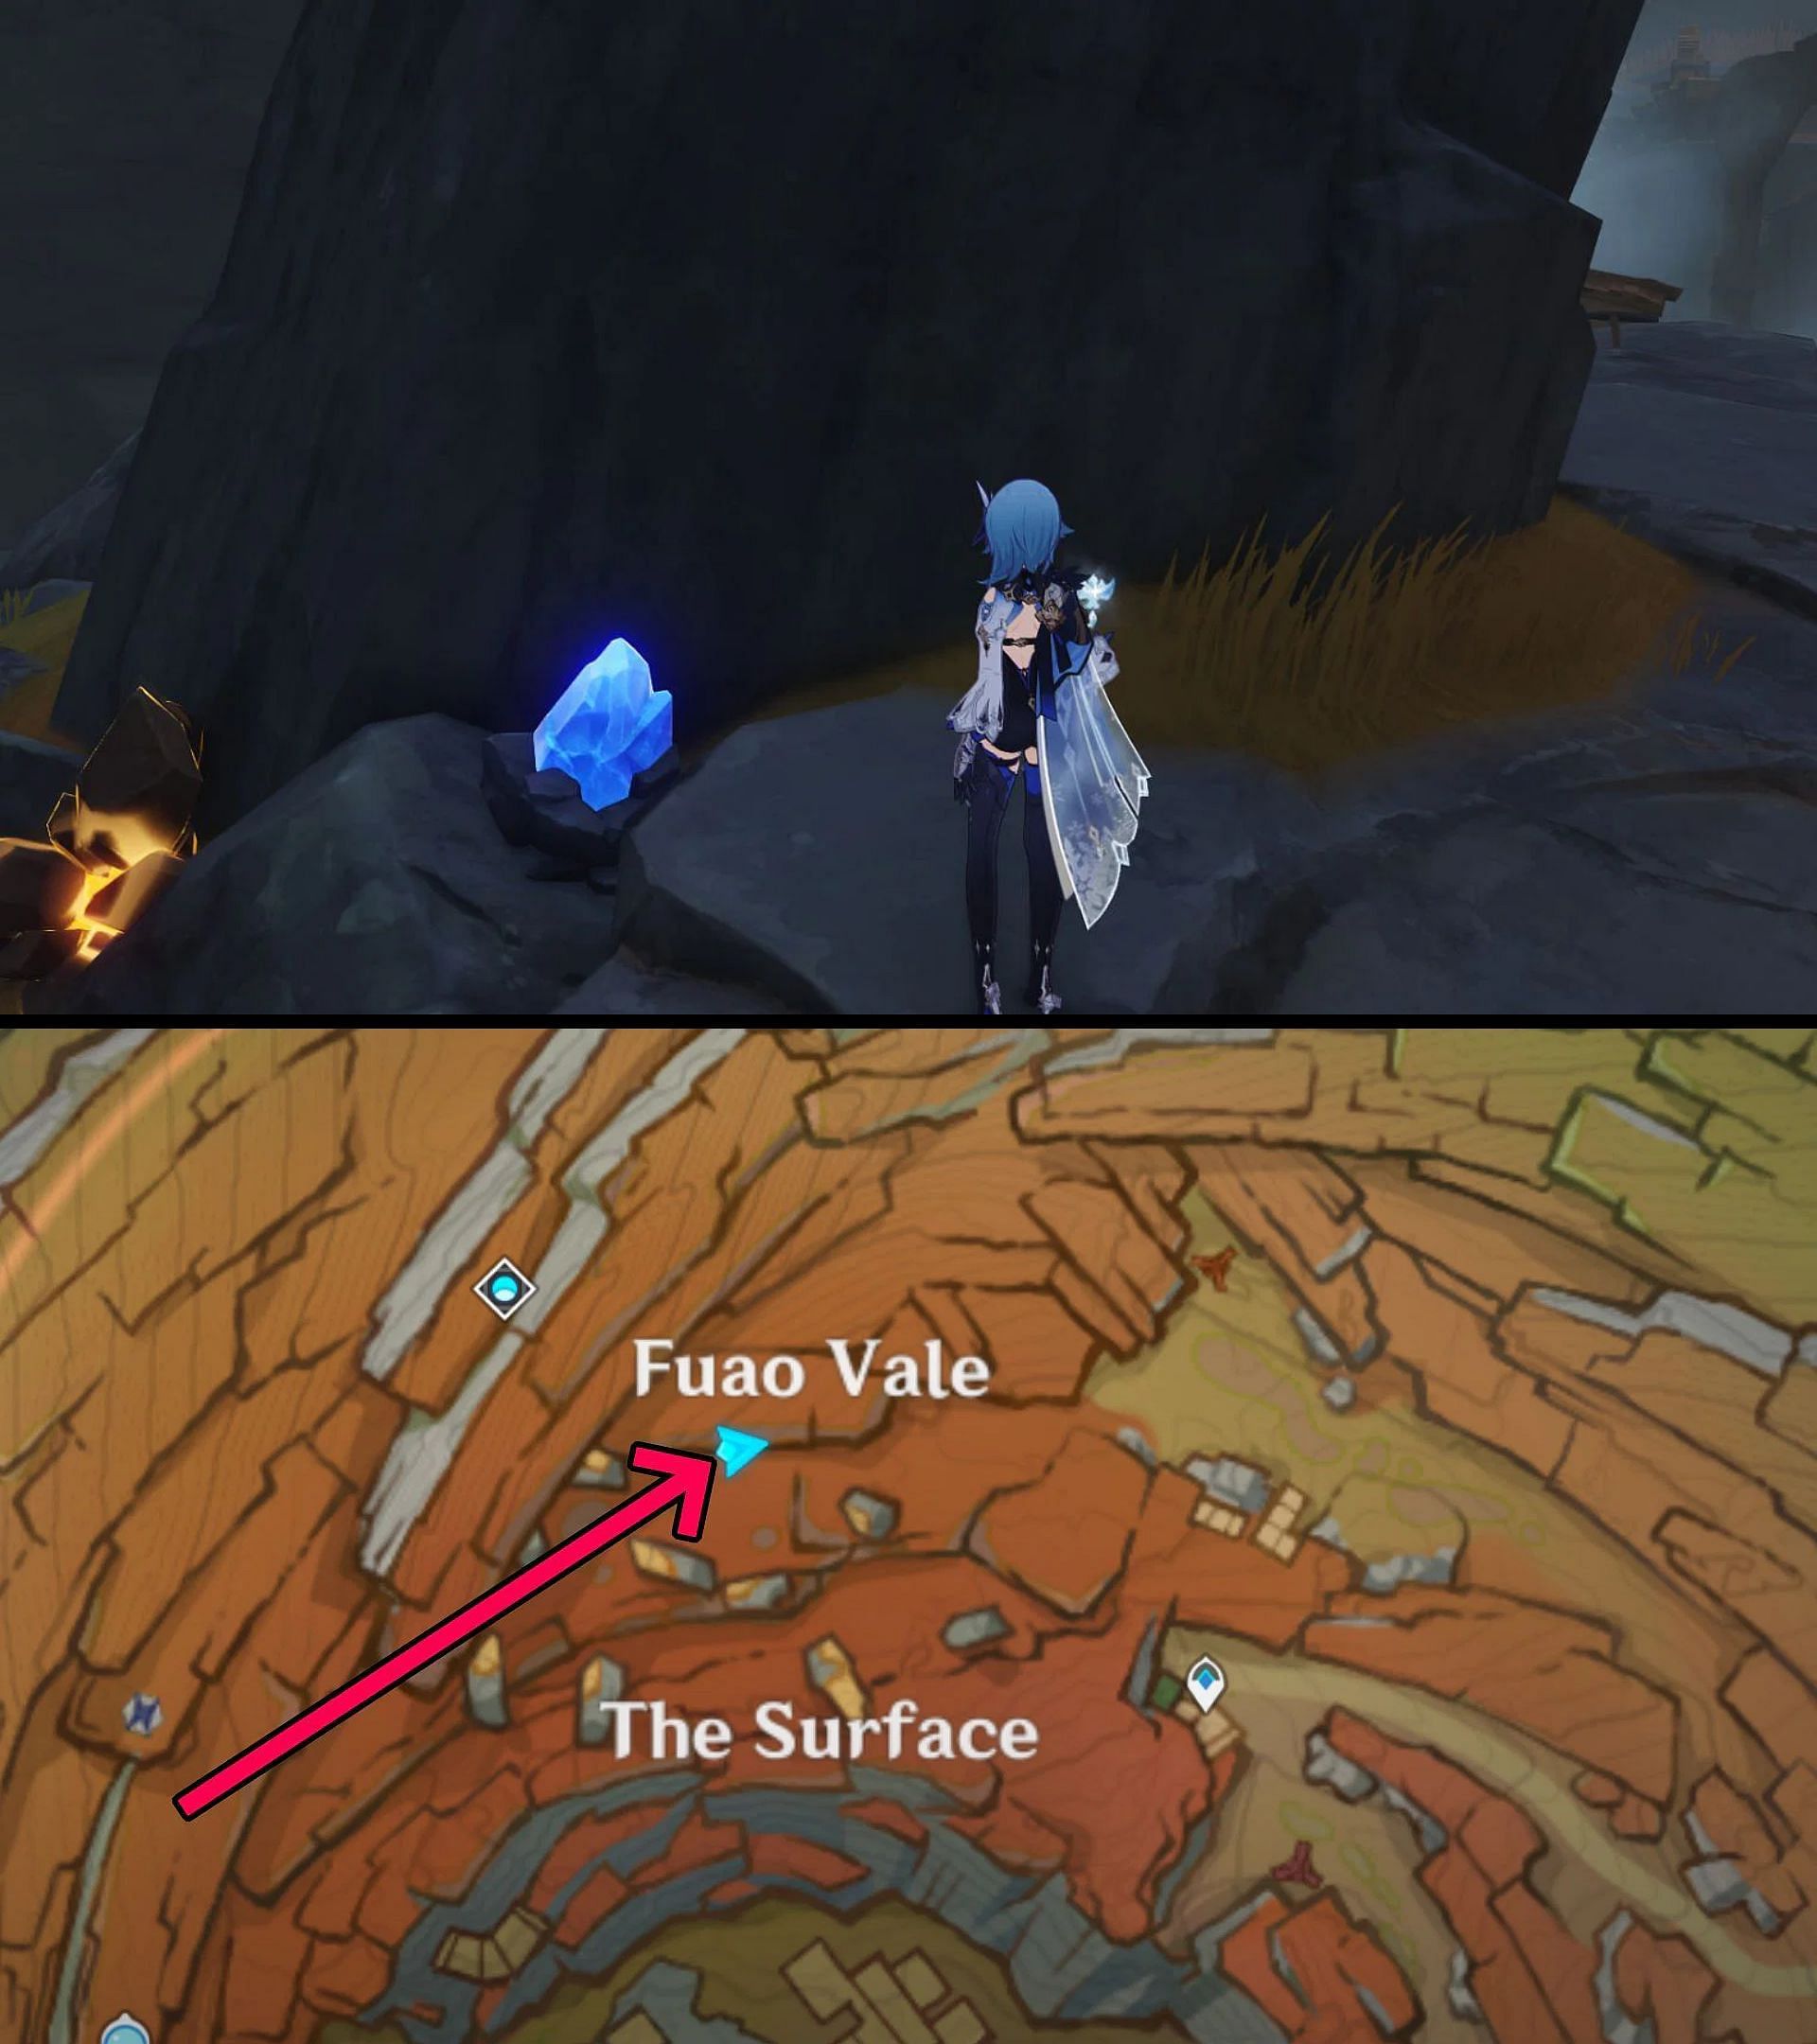 The second location, as it appears in the game and on the map (Image via HoYoverse)